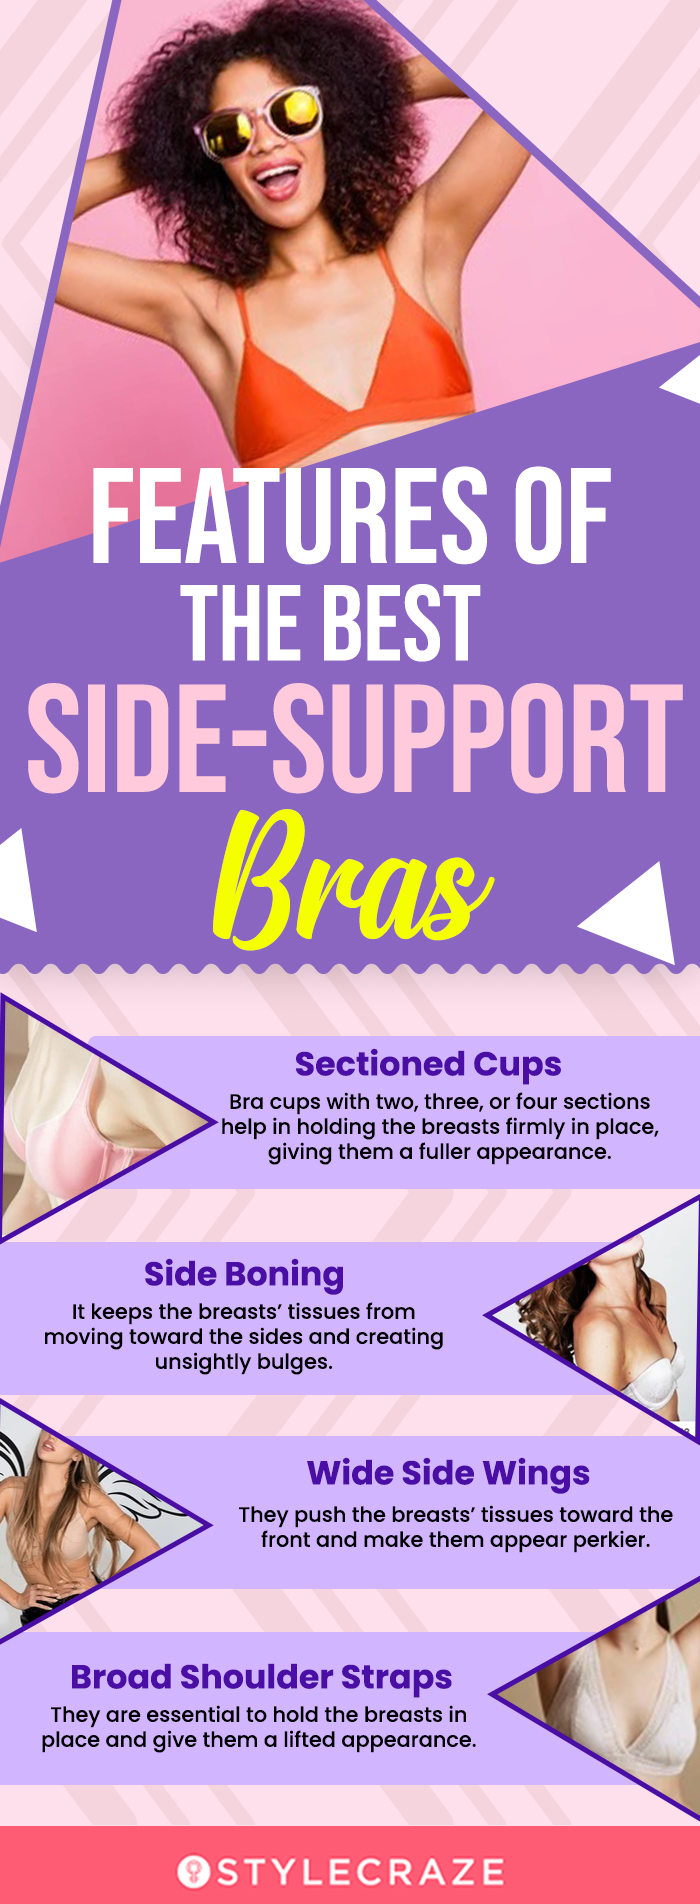 Myths And Facts About Side Supporting Bras (infographic)